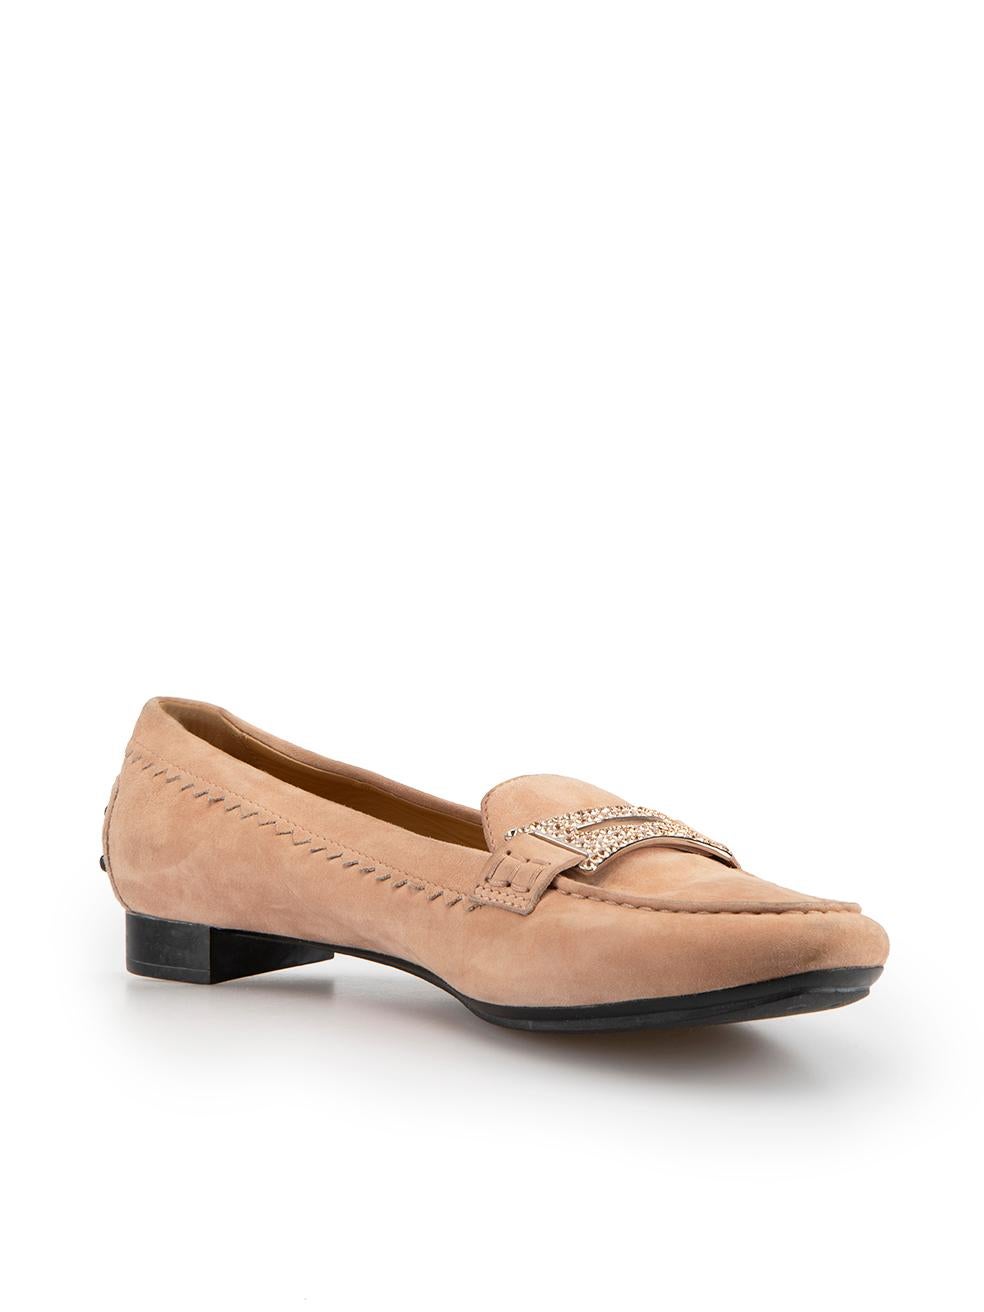 CONDITION is Very good. Minimal wear to shoes is evident. Minimal wear to the suede leather of both shoes with small scuffs this used Tod's designer resale item. These shoes come with original dust bag.



Details


Blush pink

Suede

Slip on